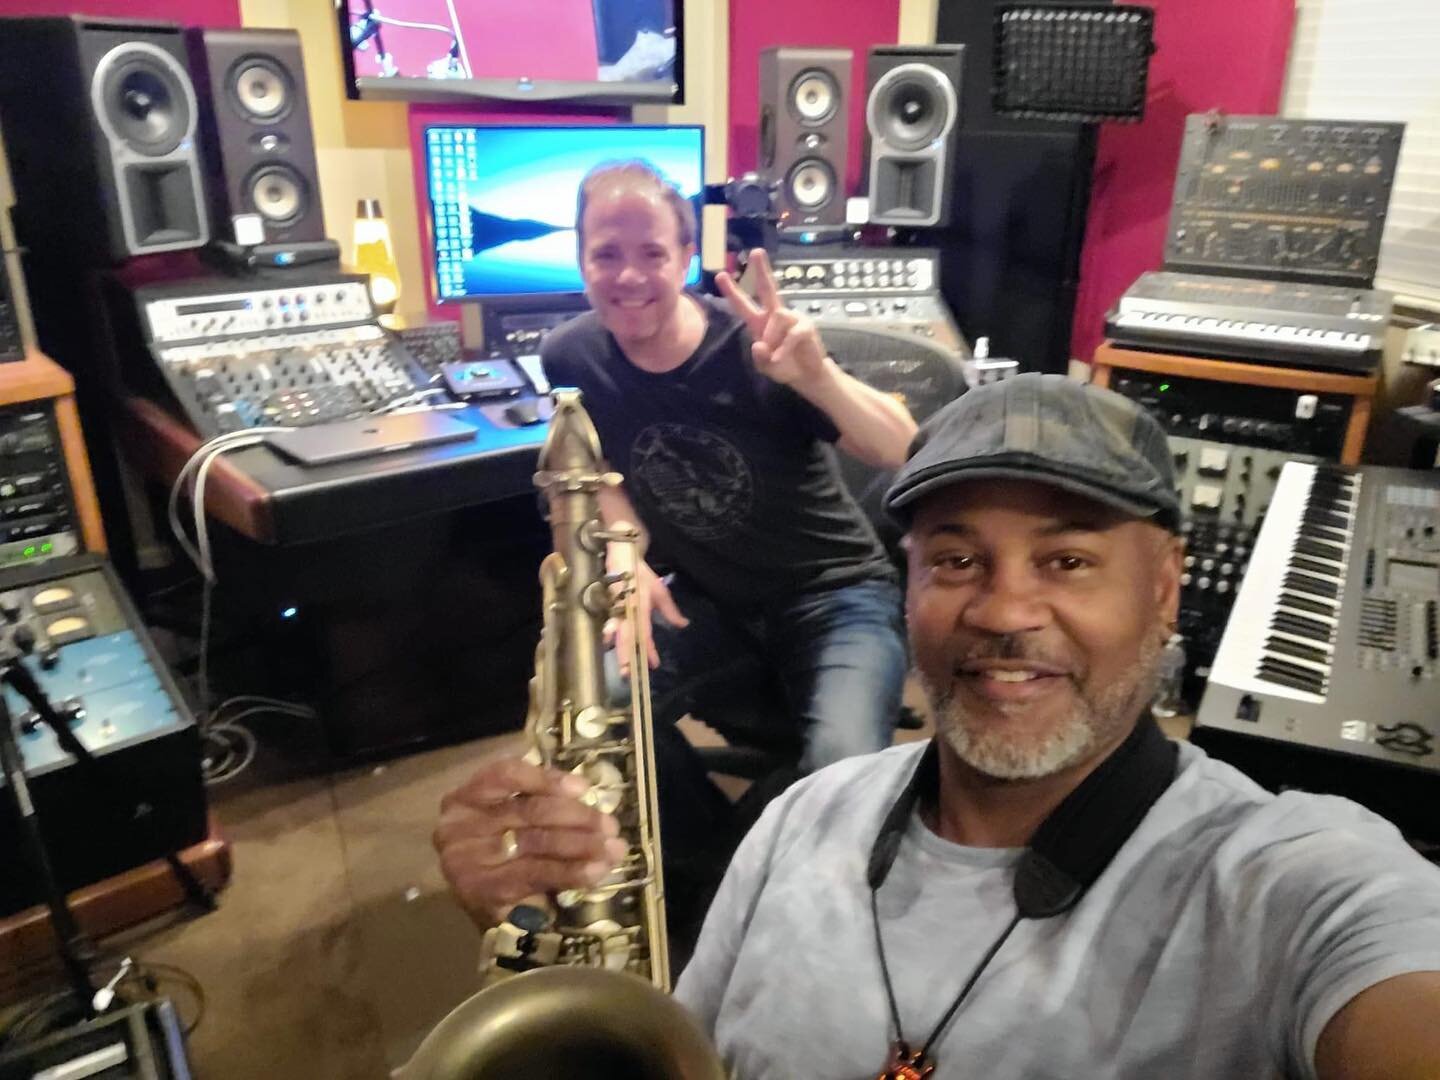 Honored and blessed to work with this awesome musician who is also a dear friend and a beautiful human being! Good times in the studio this week with saxophonist @eldontjonessax working on his new single, coming soon on @side2music 

@pmauriatmusic @